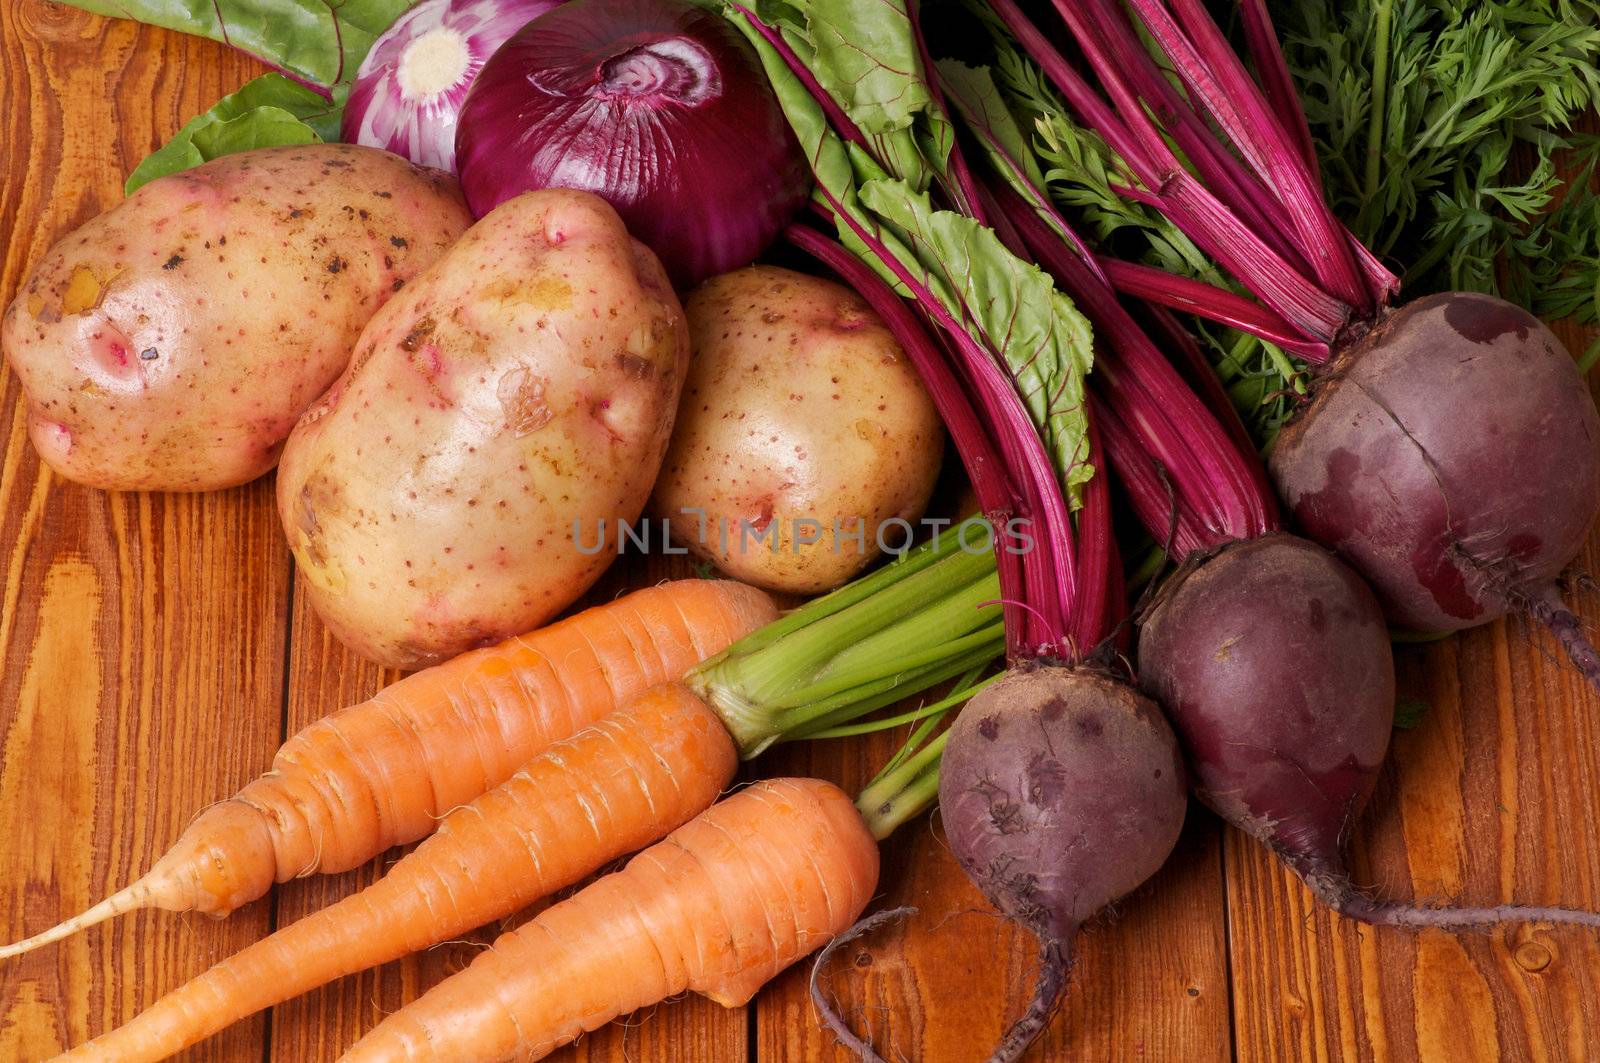 Mix of Raw Organic Farmer's Potato, Carrot, Red Onion and Beet on wooden background